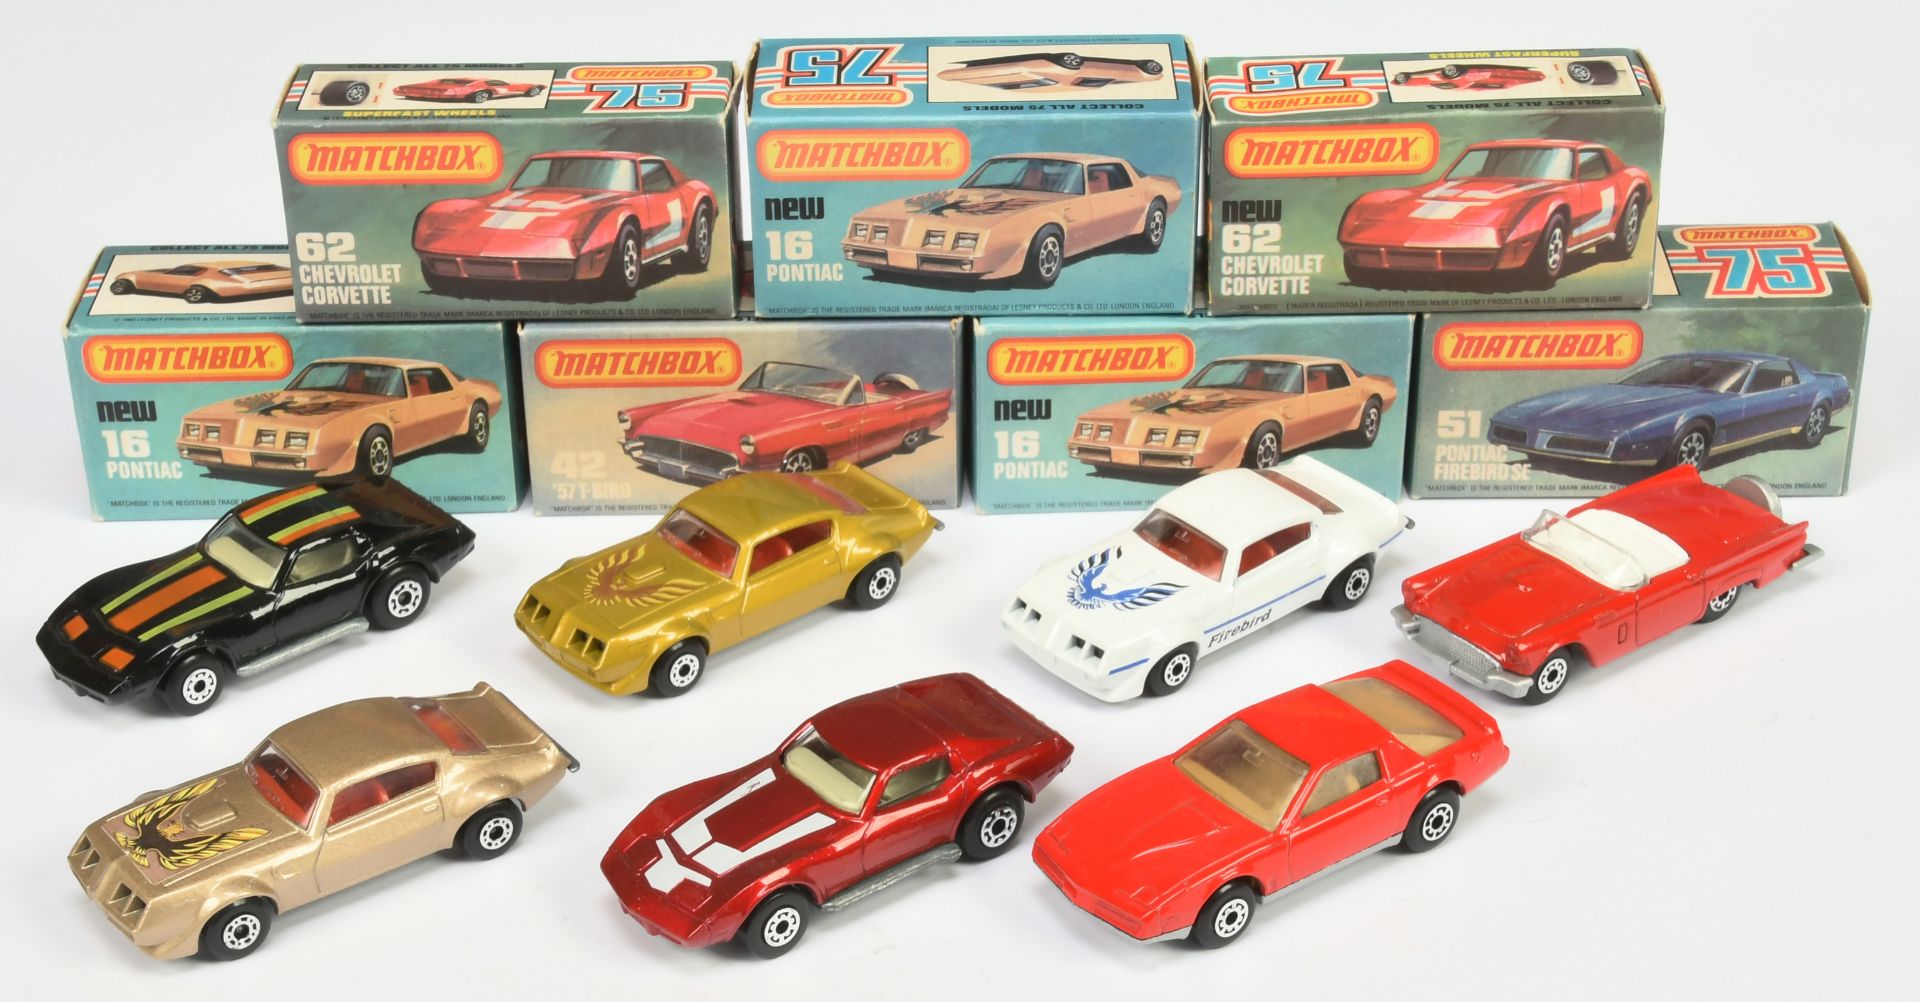 Matchbox Superfast Group Of 7 To Include  - 16b Pontiac Firebird - White, red interior, 42d ford ...